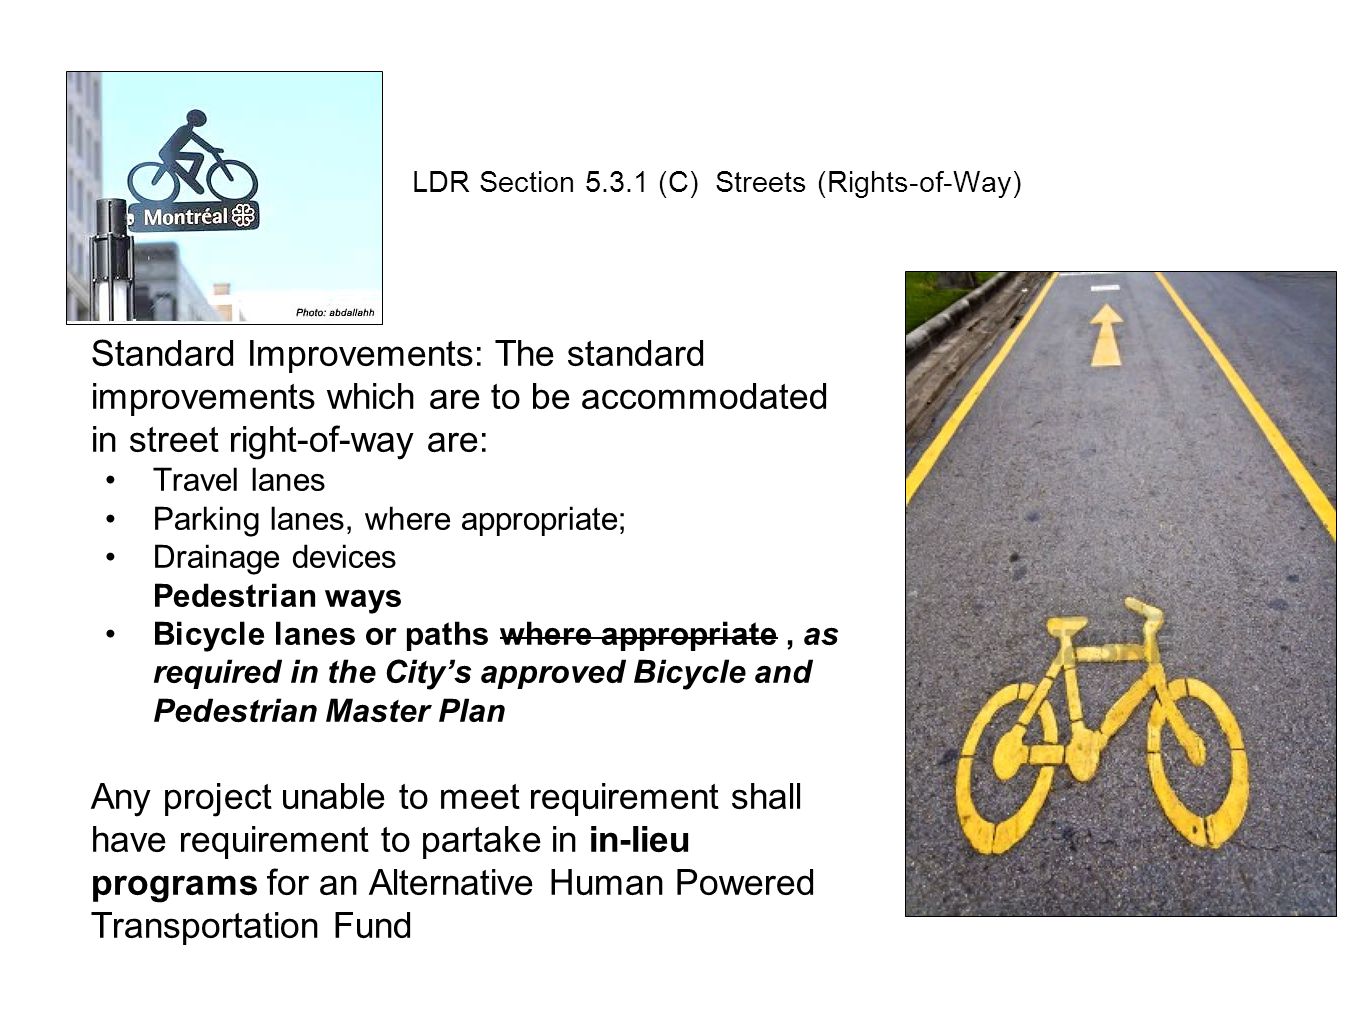 Standard Improvements: The standard improvements which are to be accommodated in street right-of-way are: Travel lanes Parking lanes, where appropriate; Drainage devices Pedestrian ways Bicycle lanes or paths where appropriate, as required in the City’s approved Bicycle and Pedestrian Master Plan Any project unable to meet requirement shall have requirement to partake in in-lieu programs for an Alternative Human Powered Transportation Fund LDR Section (C) Streets (Rights-of-Way)